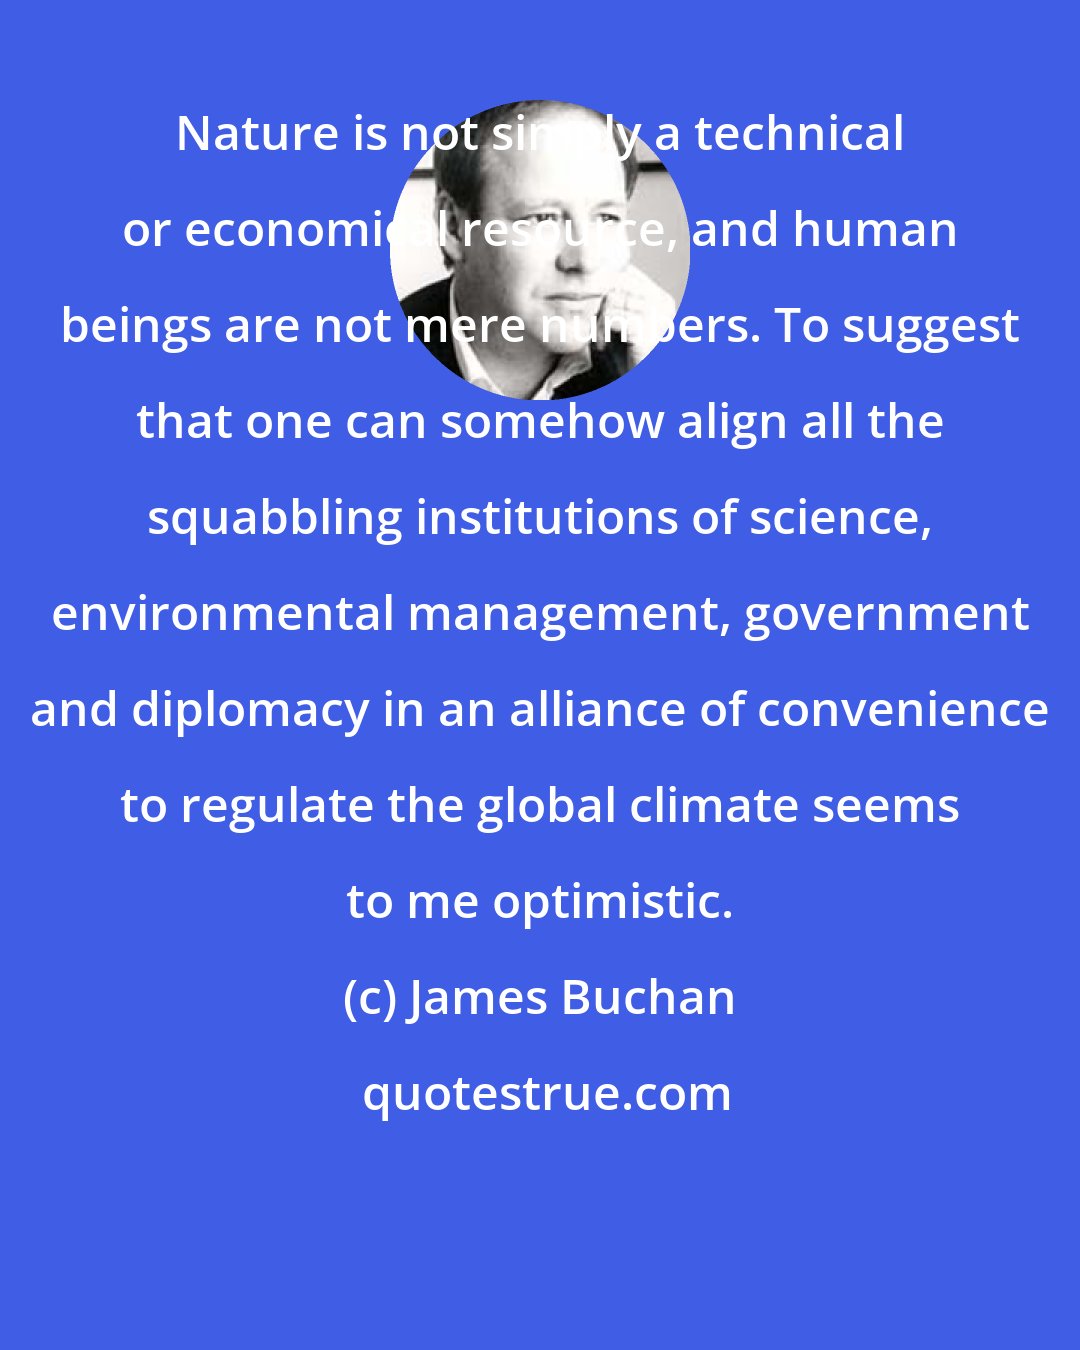 James Buchan: Nature is not simply a technical or economical resource, and human beings are not mere numbers. To suggest that one can somehow align all the squabbling institutions of science, environmental management, government and diplomacy in an alliance of convenience to regulate the global climate seems to me optimistic.